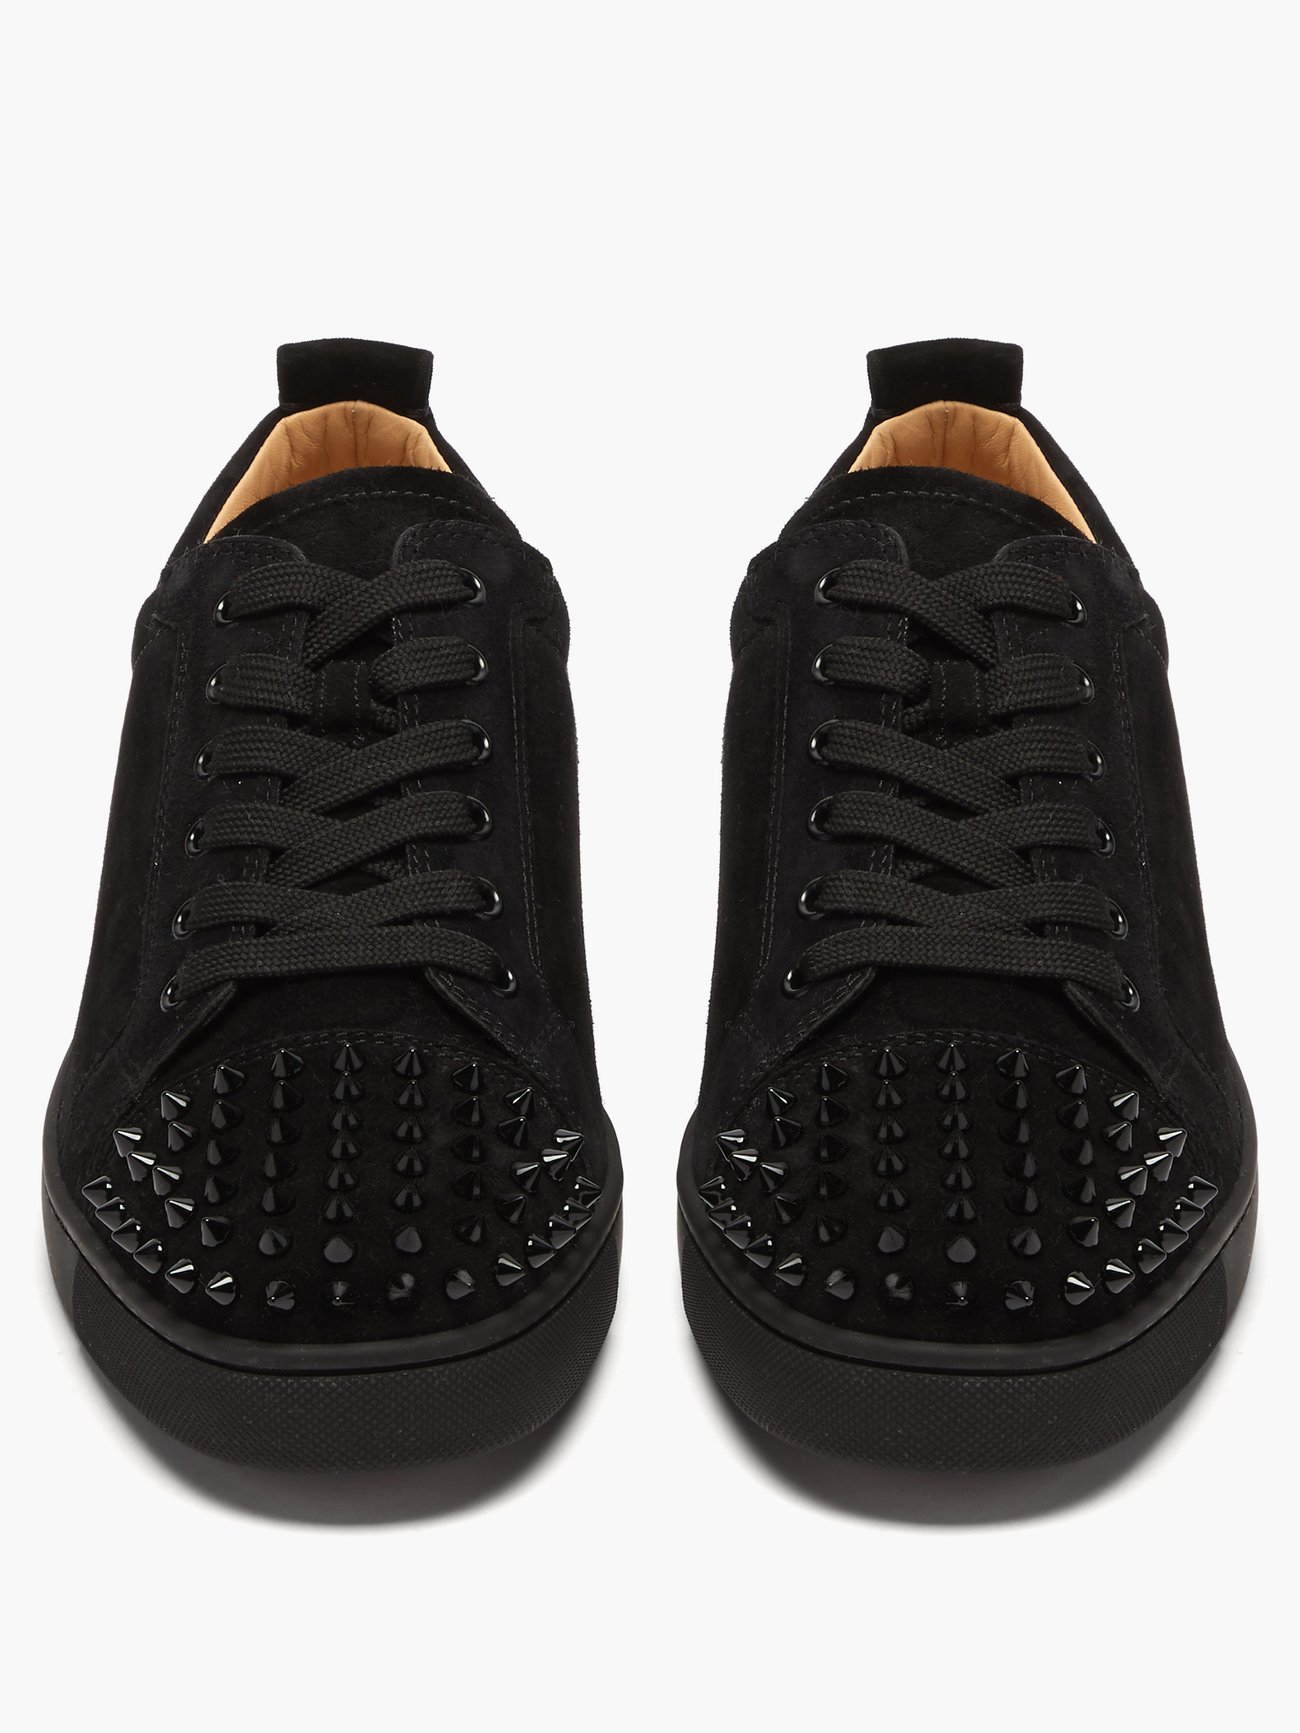 Christian Louboutin New $945 Spikes Sneakers Shoes Trainers 47 - 14